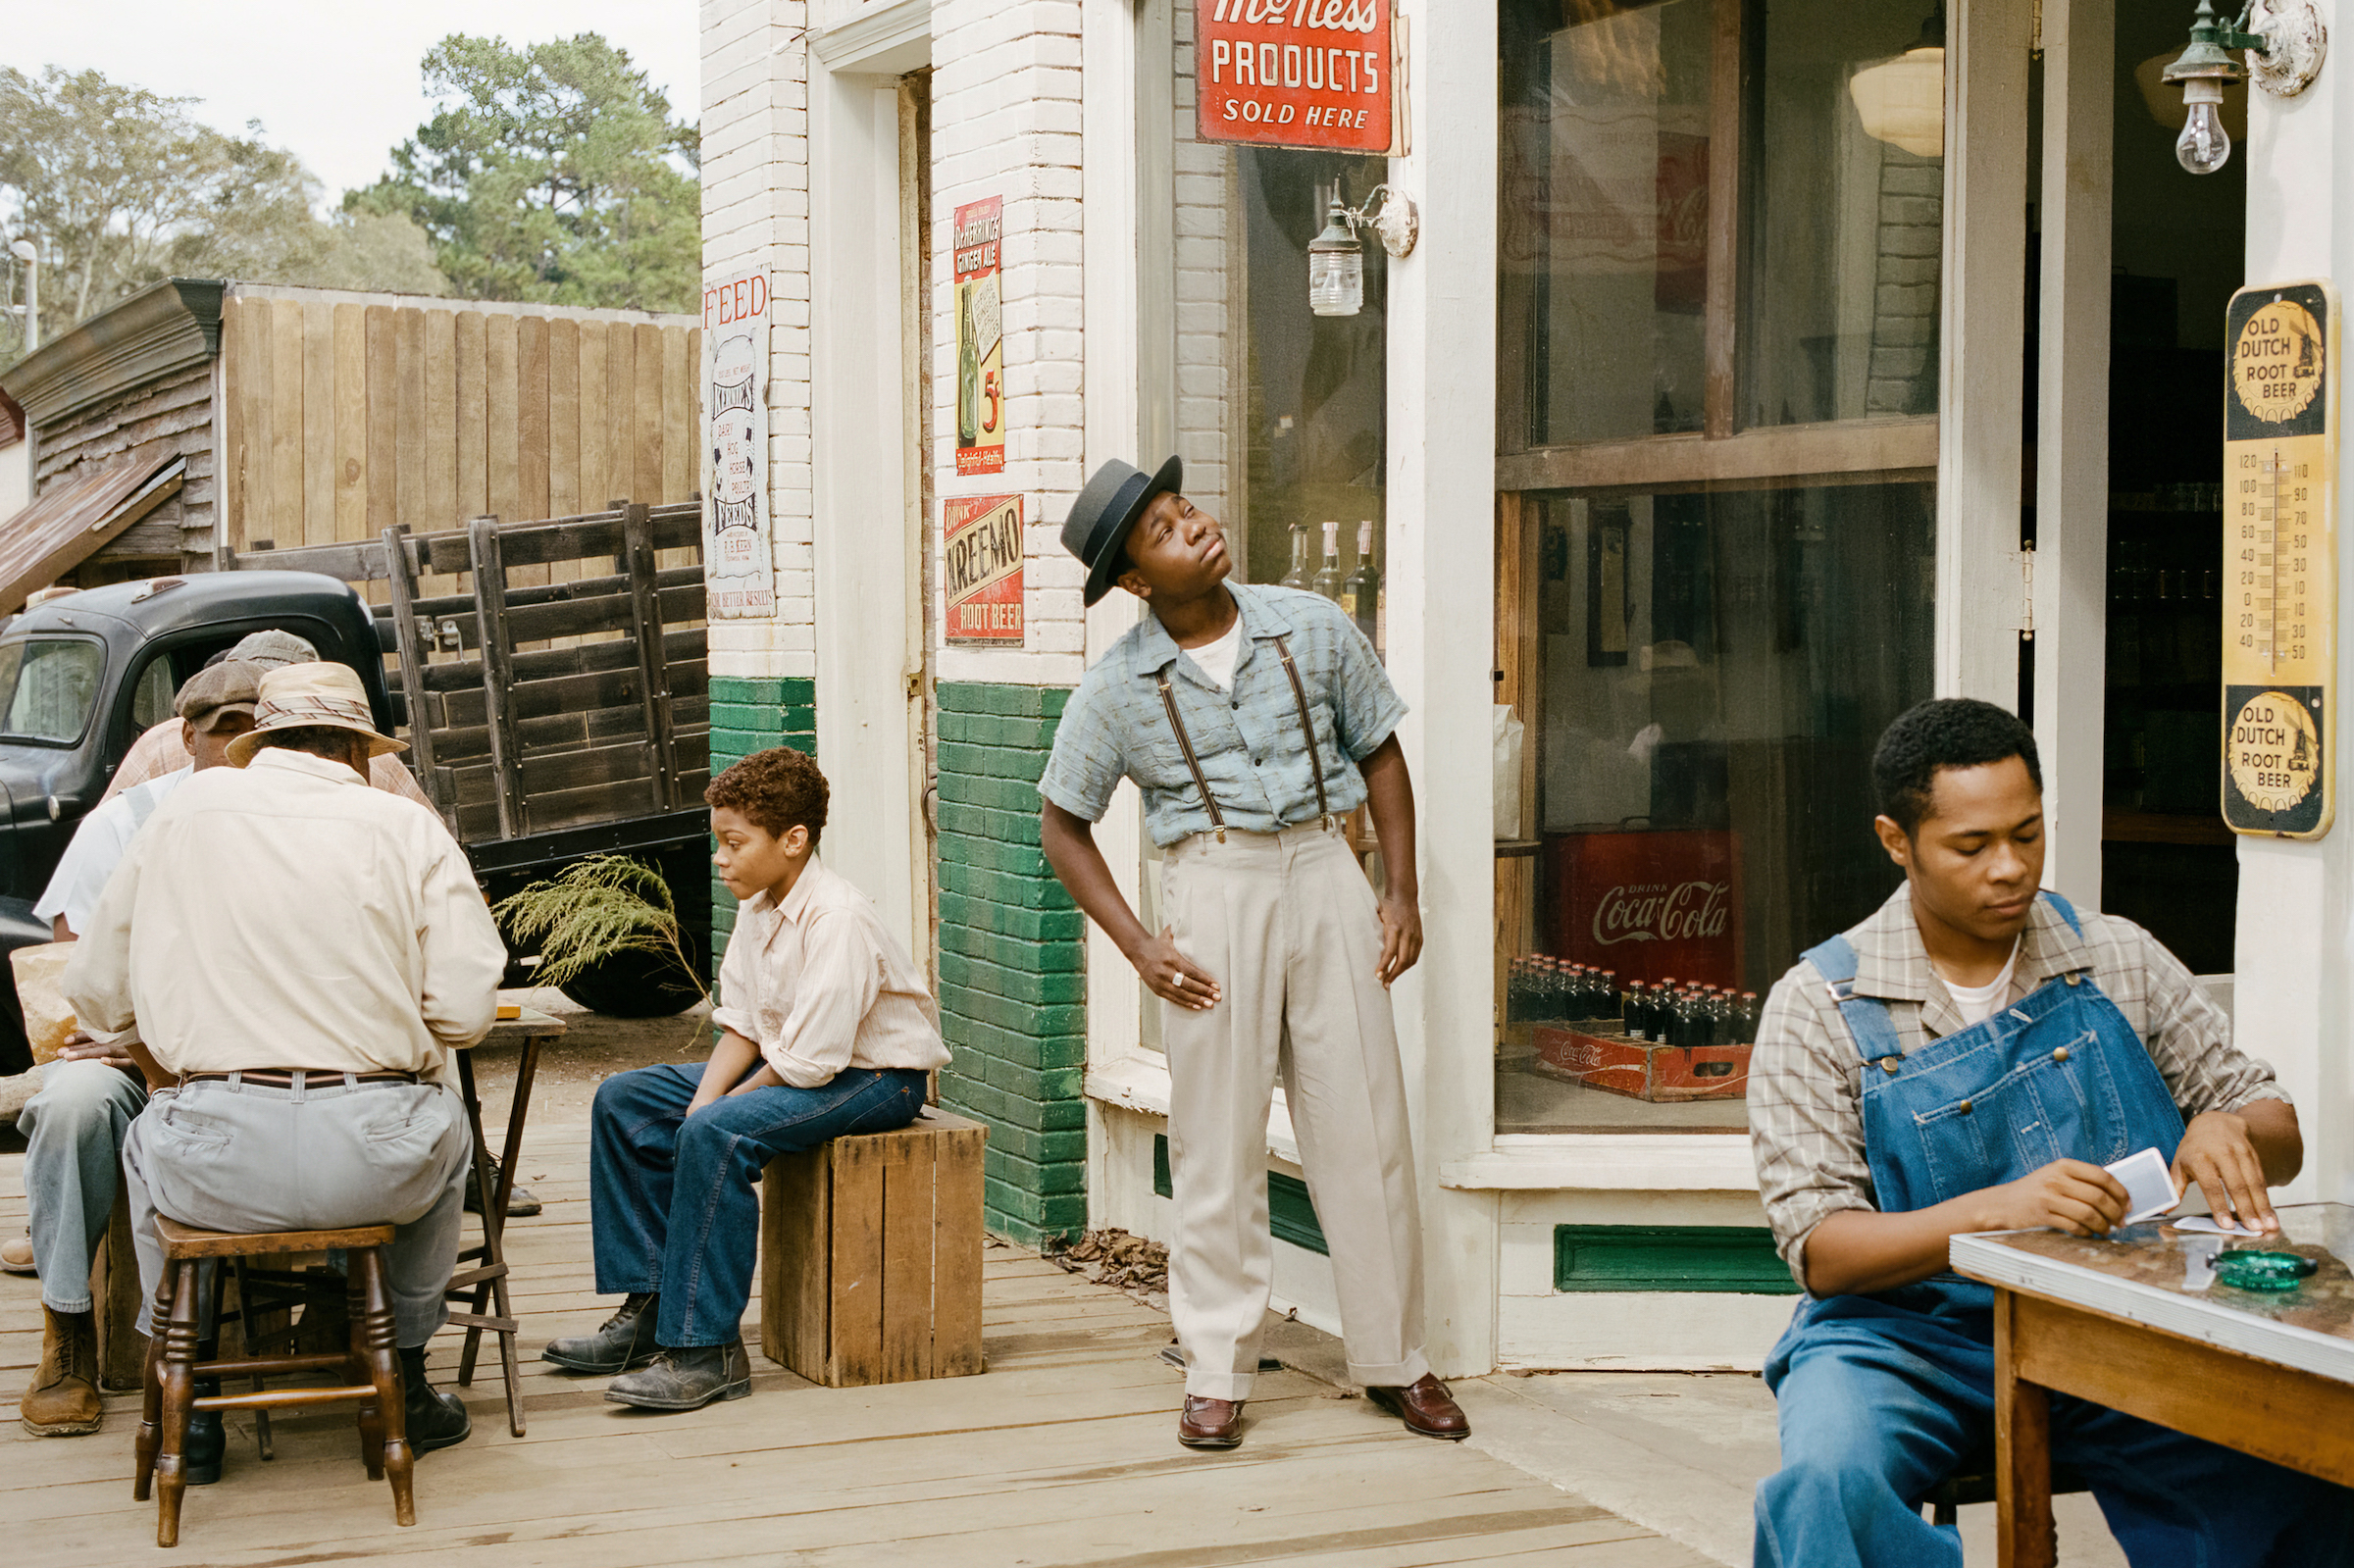 Jalyn Hall as Emmett Till, standing outside the Bryants' store in Money, Miss. (Andre D. Wagner —Orion Pictures)